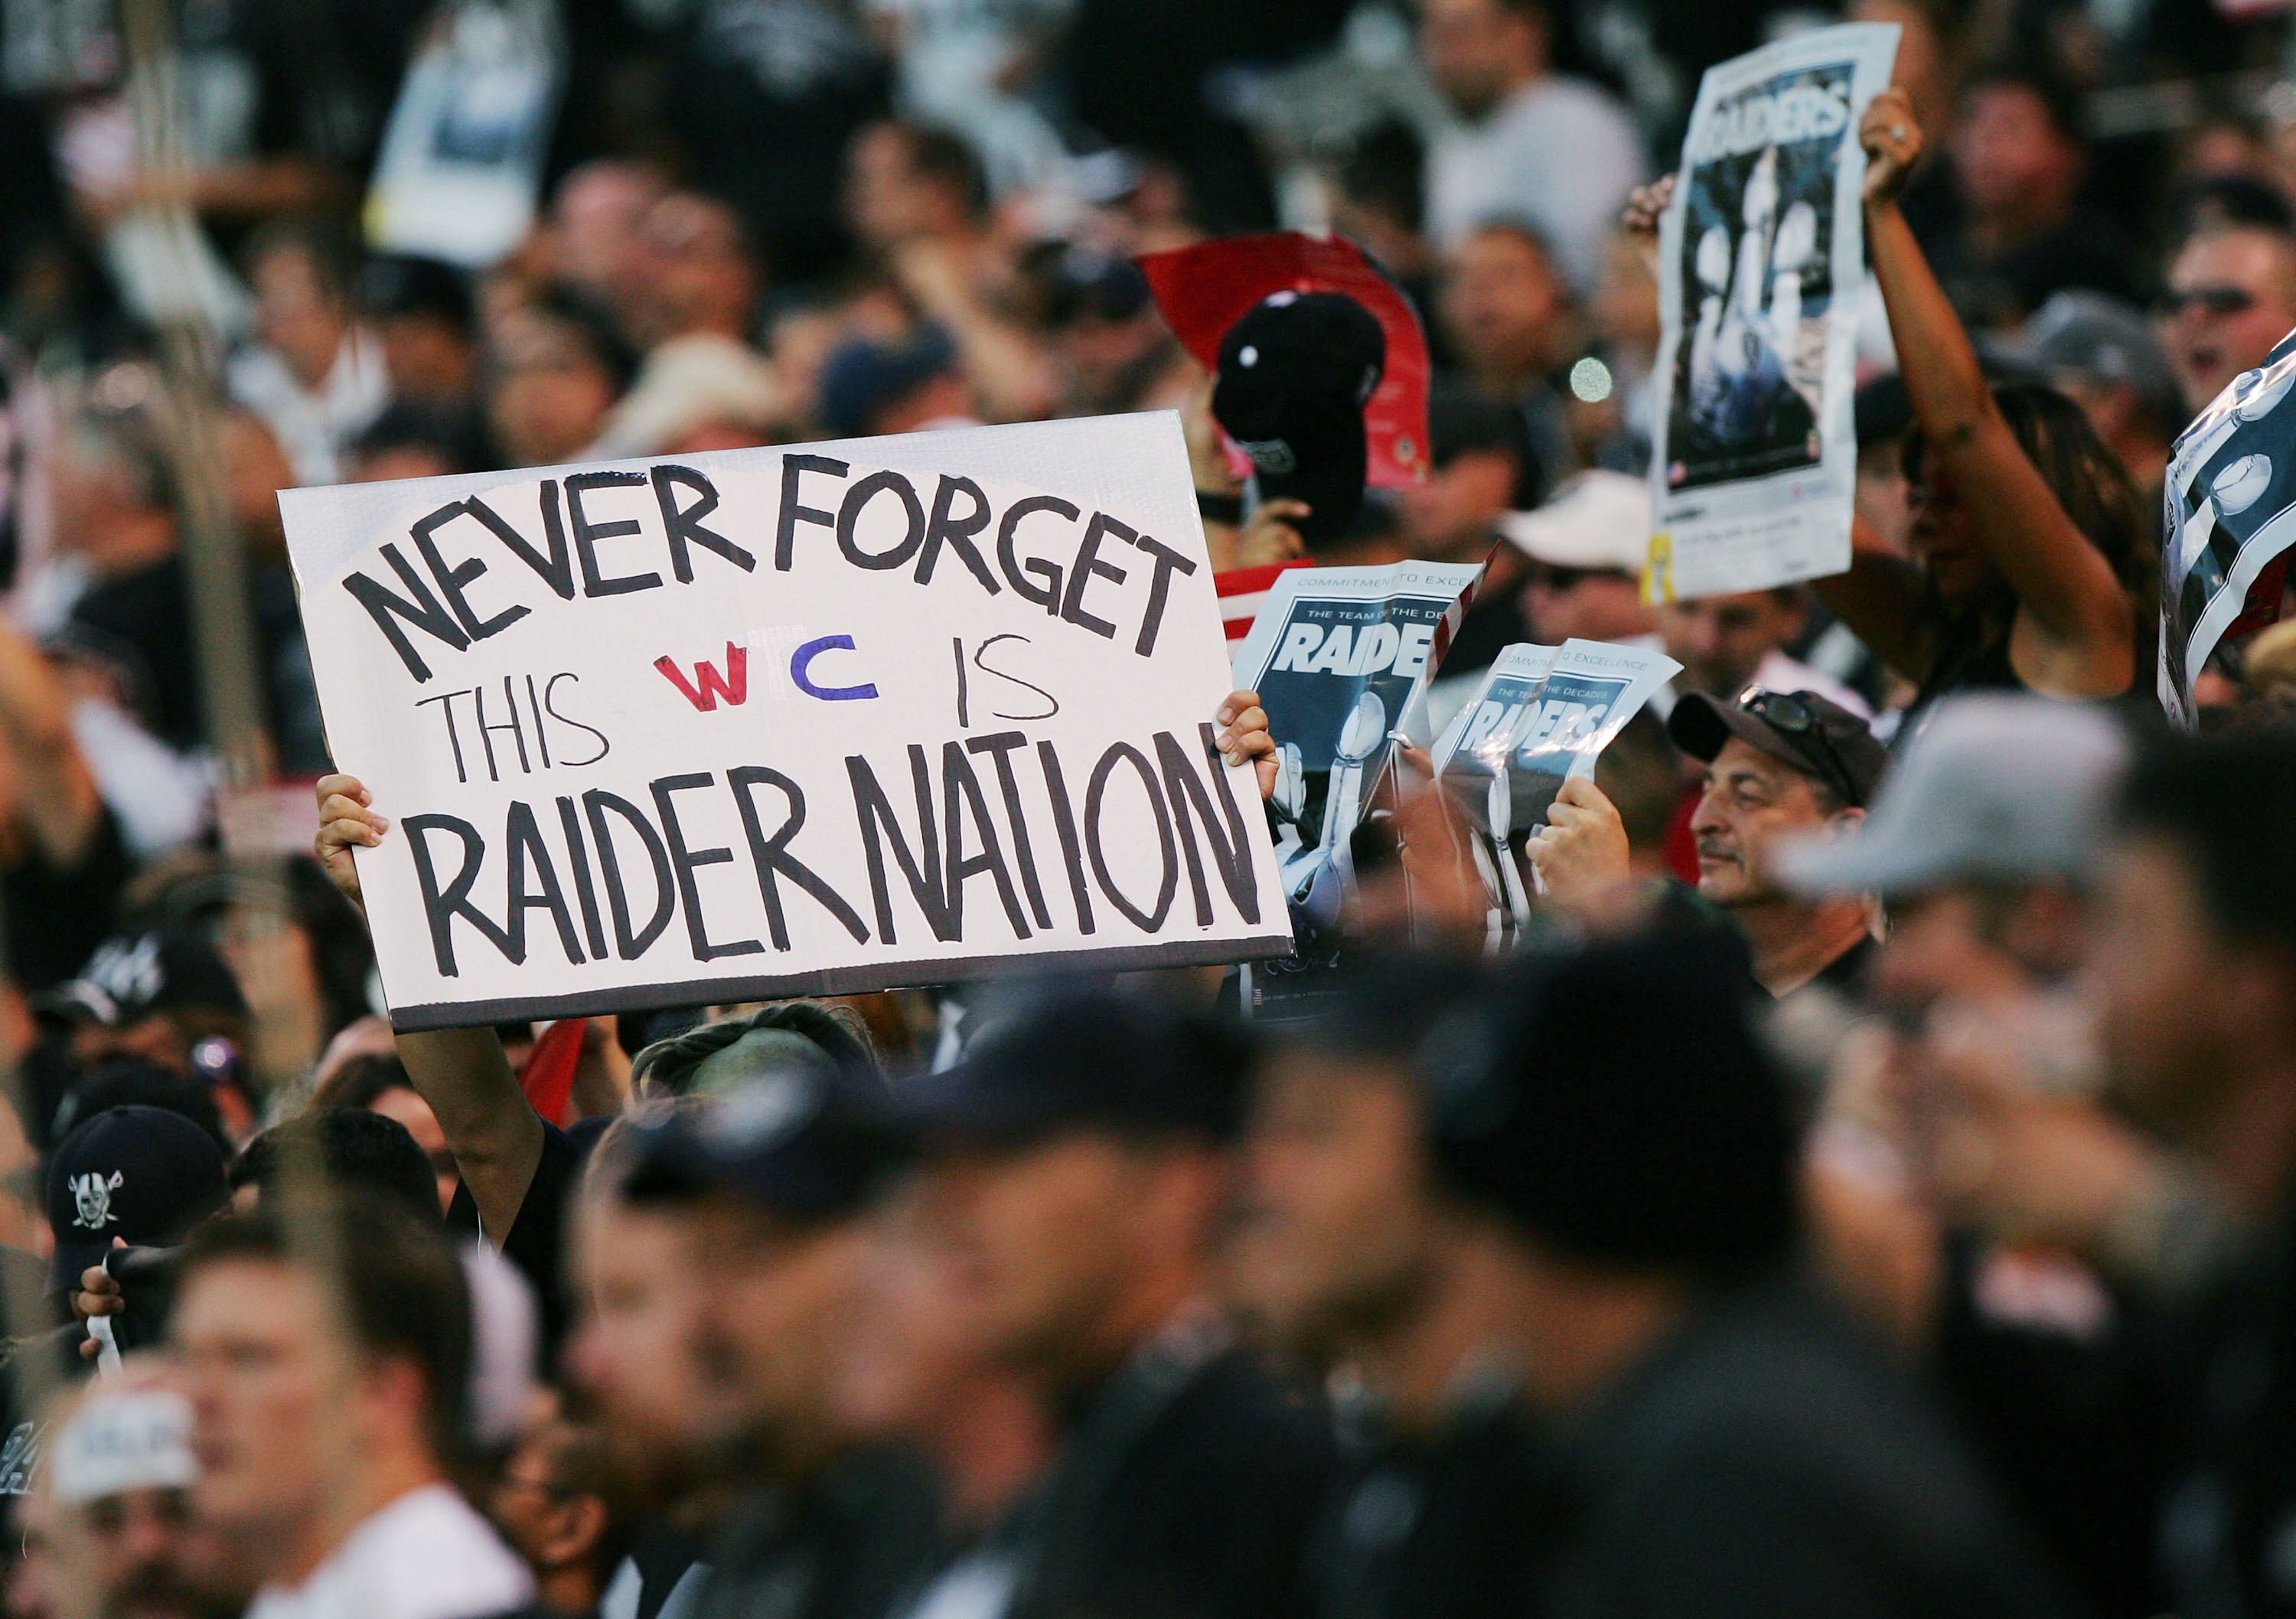 OAKLAND, CA - SEPTEMBER 11:   Fans observe a moment of silence in honor of the lives lost on September 11, 2001, before the NFL game between the Oakland Raiders and the San Diego Chargers at McAfee Coliseum on September 11, 2006 in Oakland, California.  (